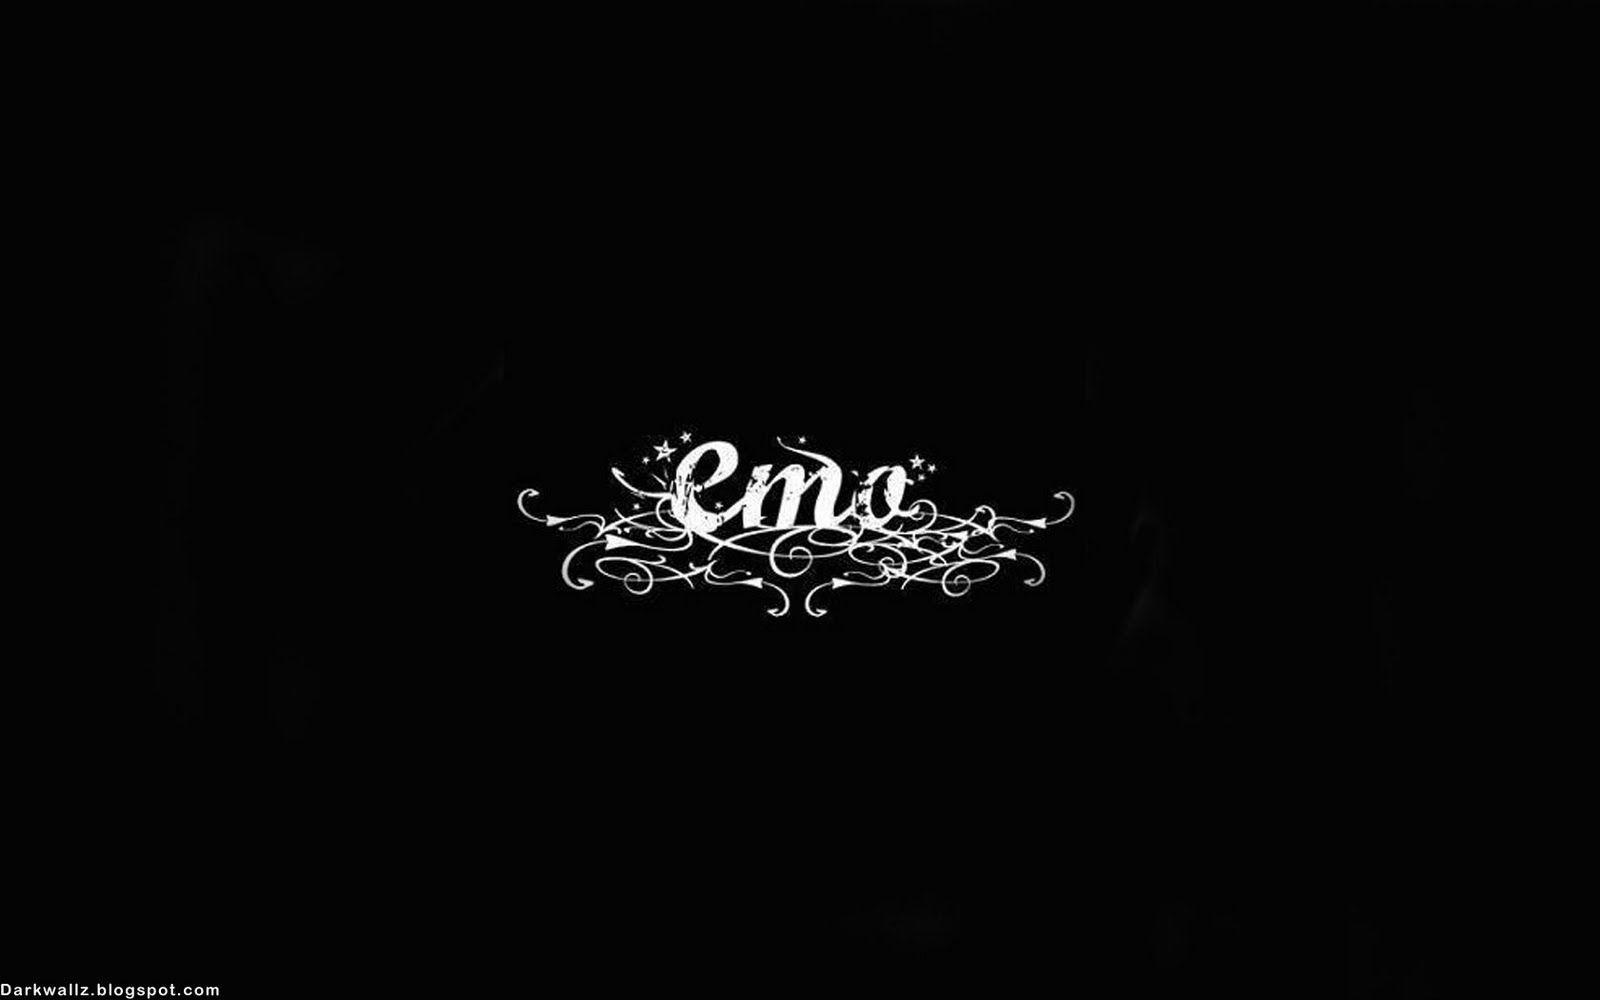 The logo of a black and white background with an ornate font - Emo